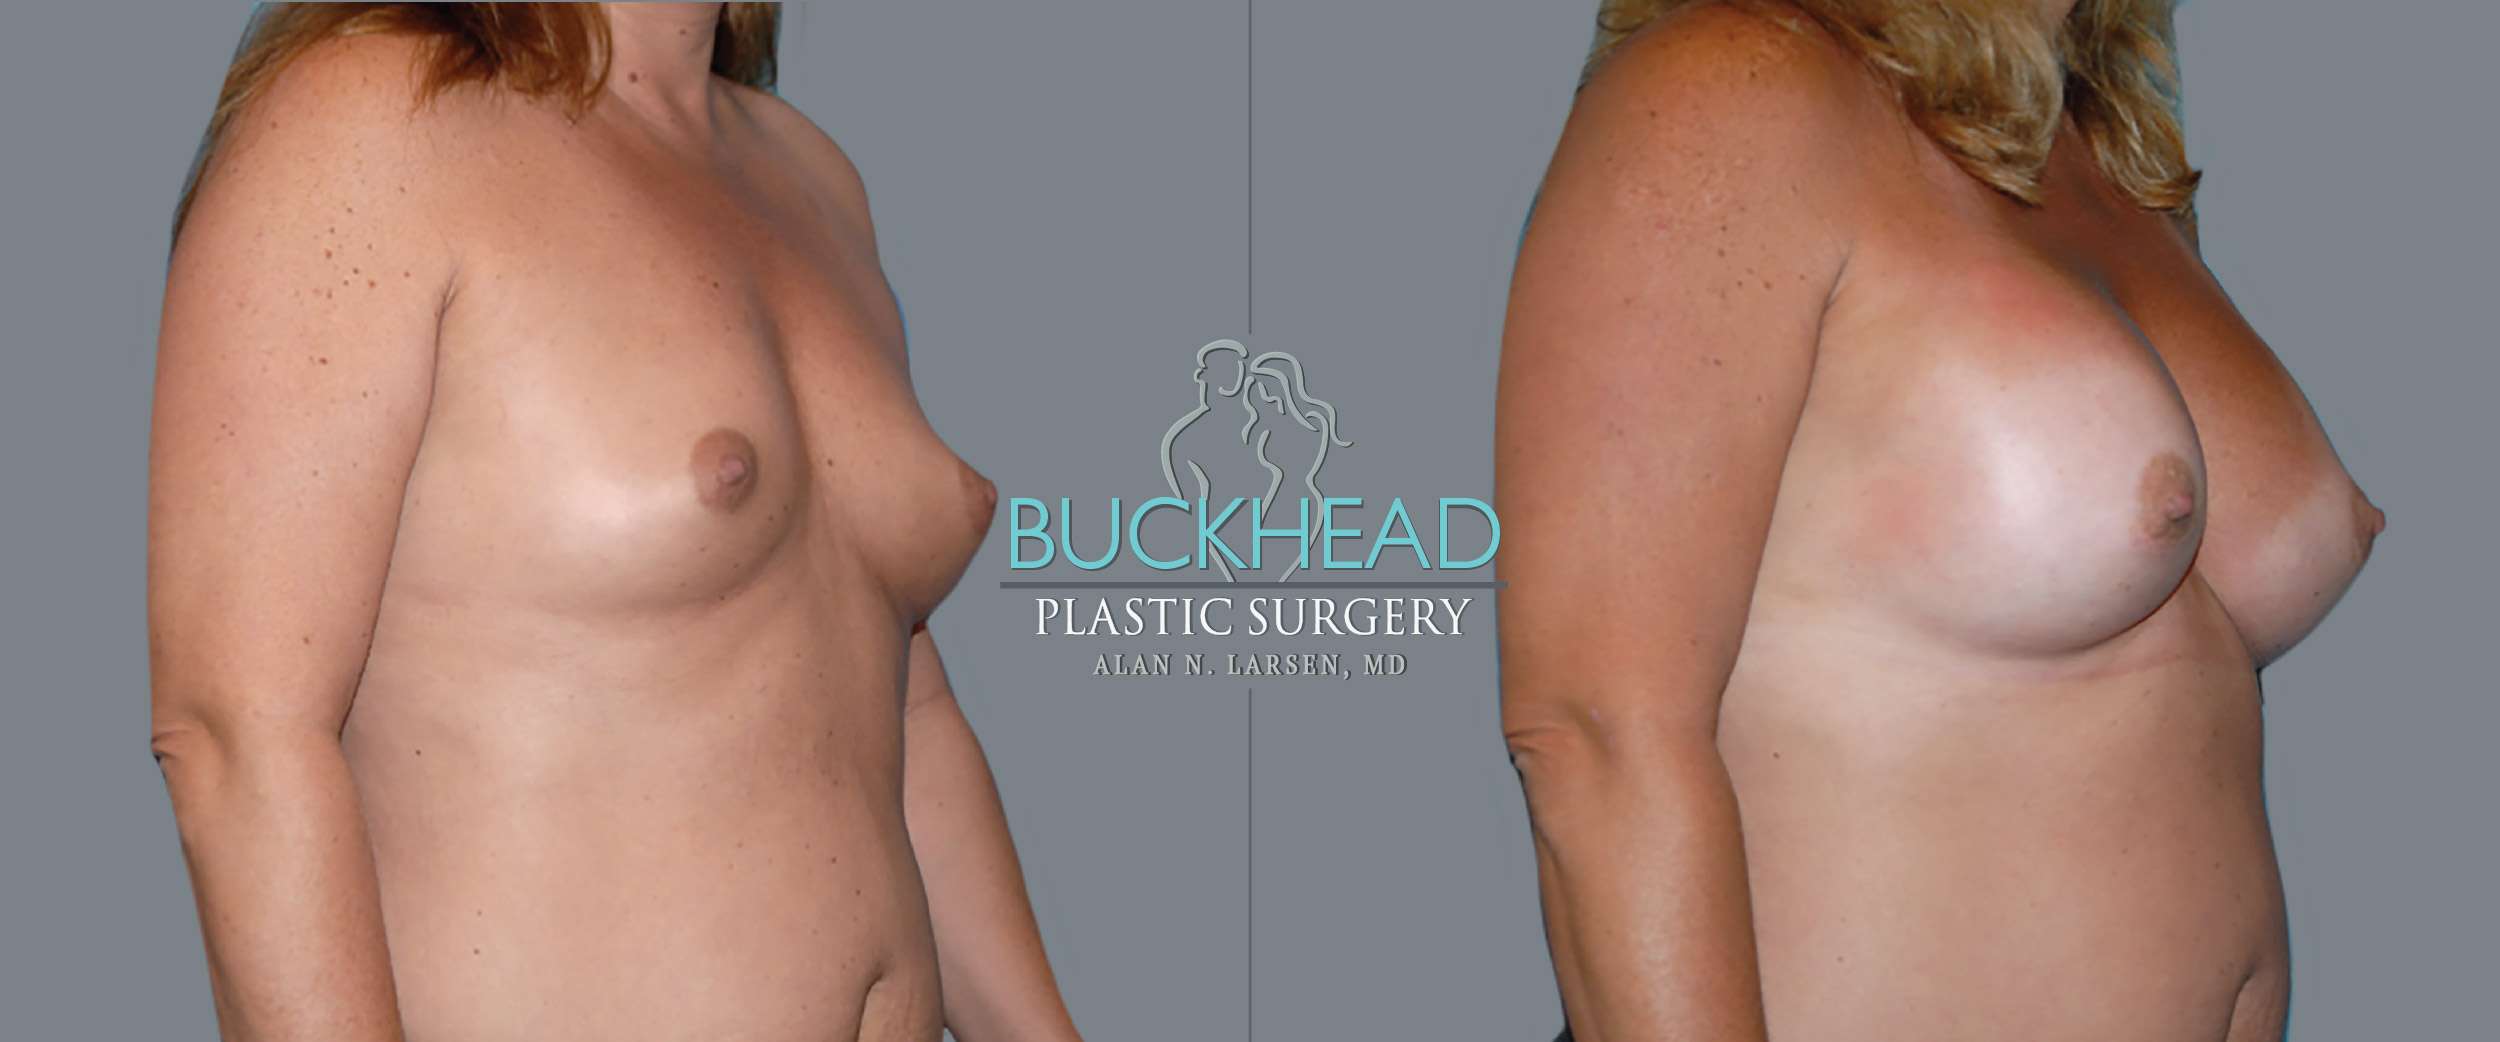 Before and After Photo gallery | Breast Augmentation | Buckhead Plastic Surgery | Double Board-Certified Plastic Surgeon in Atlanta GA